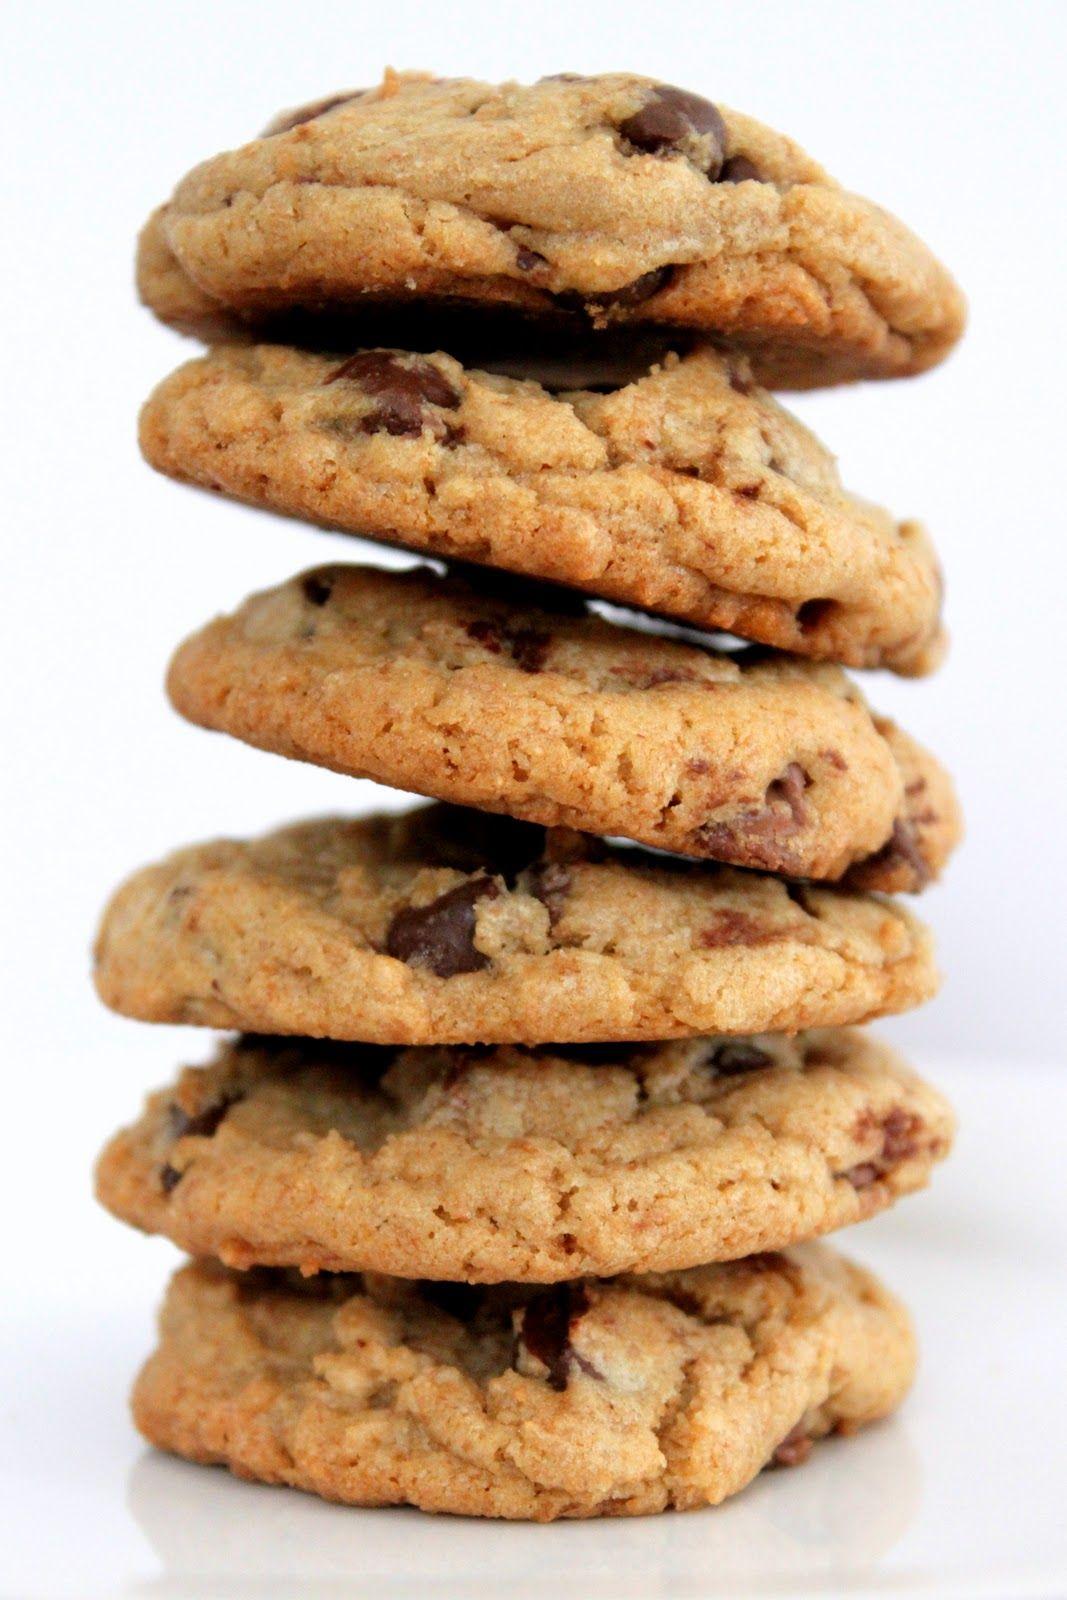 Jacques Torres's Chocolate Chip Cookies